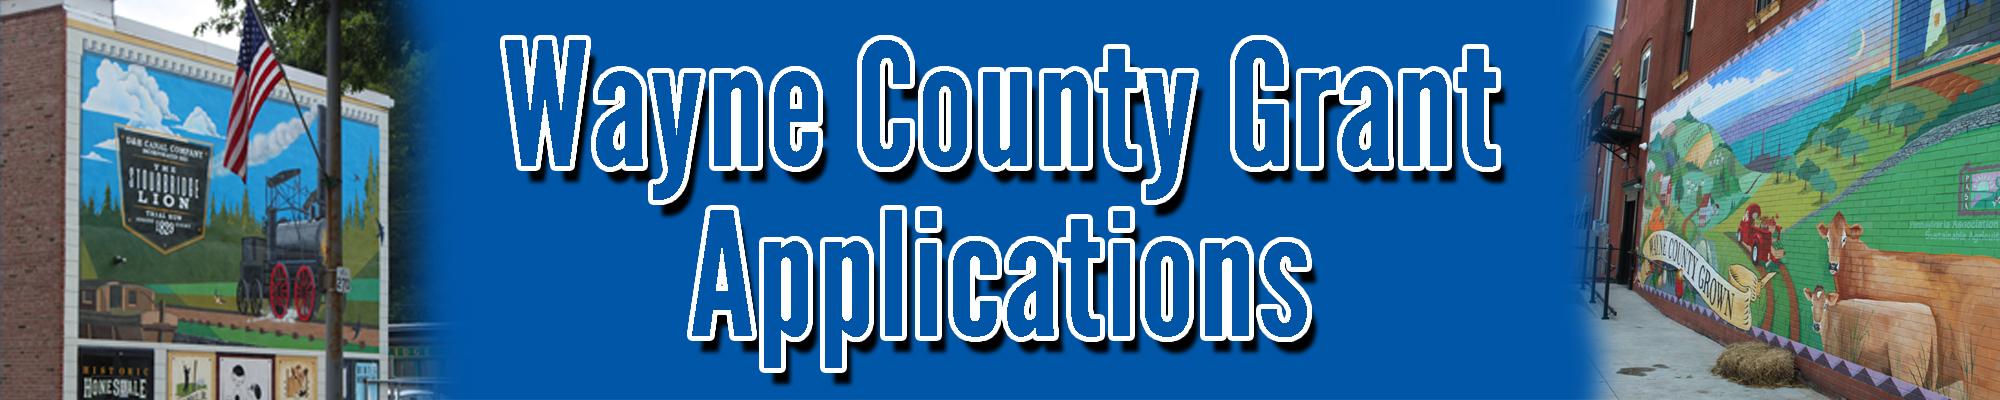 Wayne County Grant Applications Available Now